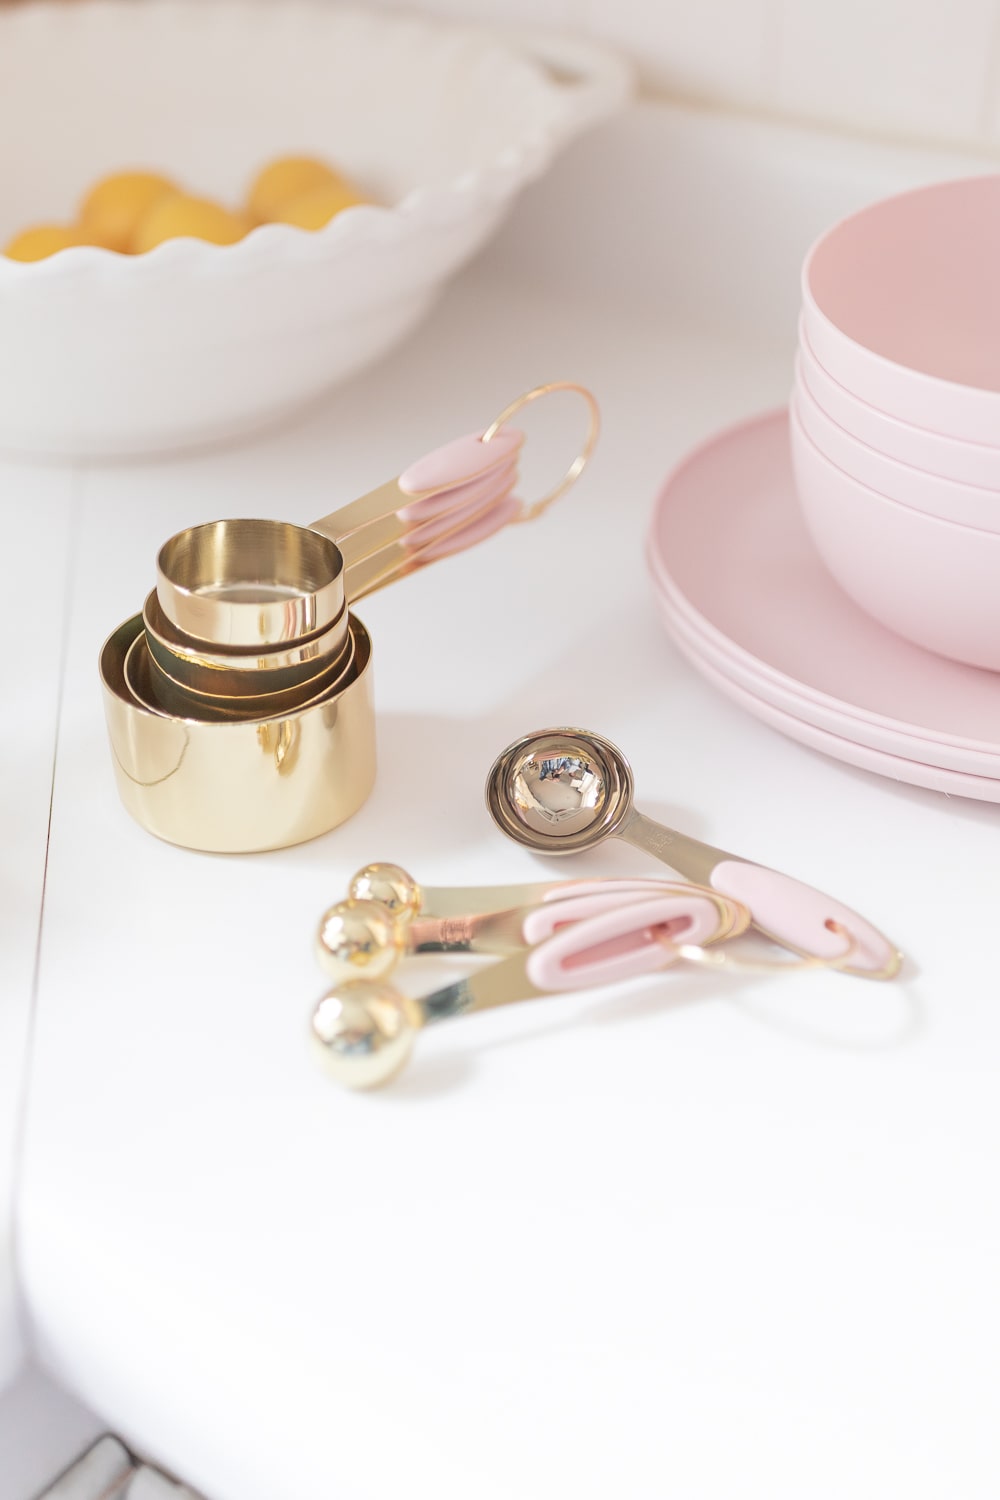 Pink and gold measuring cups from Amazon photographed by blogger Stephanie Ziajka on Diary of a Debutante